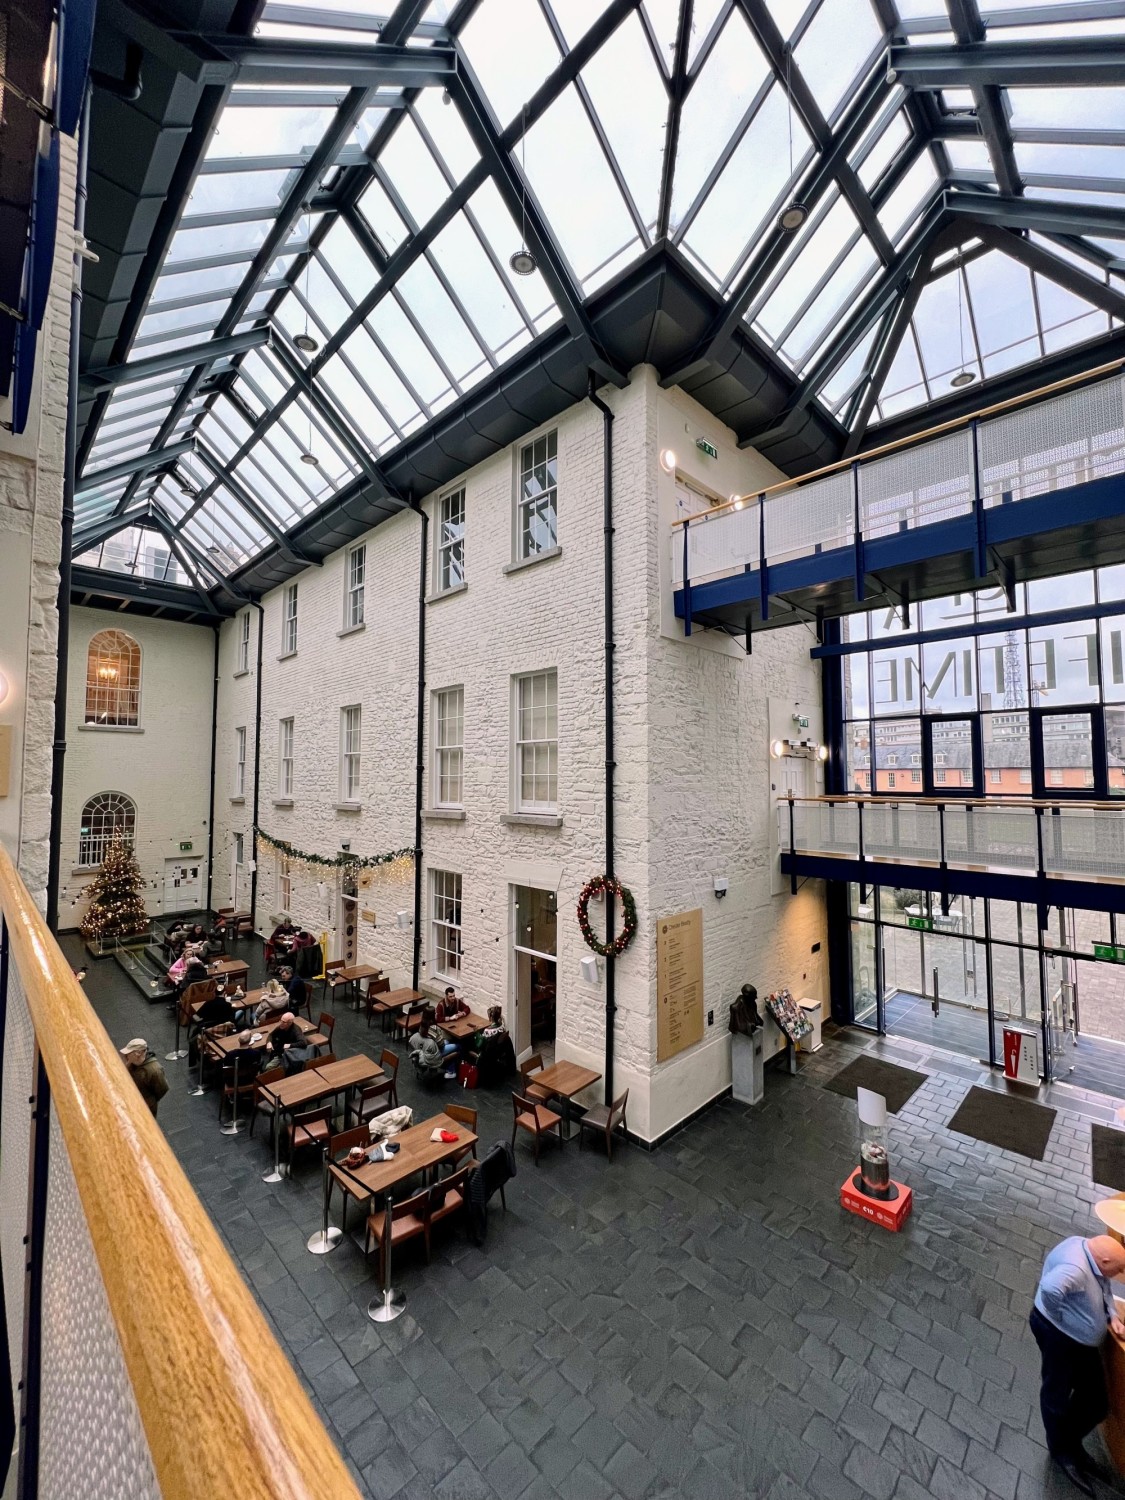 A top-down view of one of the dining areas at the Silk Road Cafe in the Chester Beatty Library complete with tiled flooring, white brick walls and a glass ceiling.